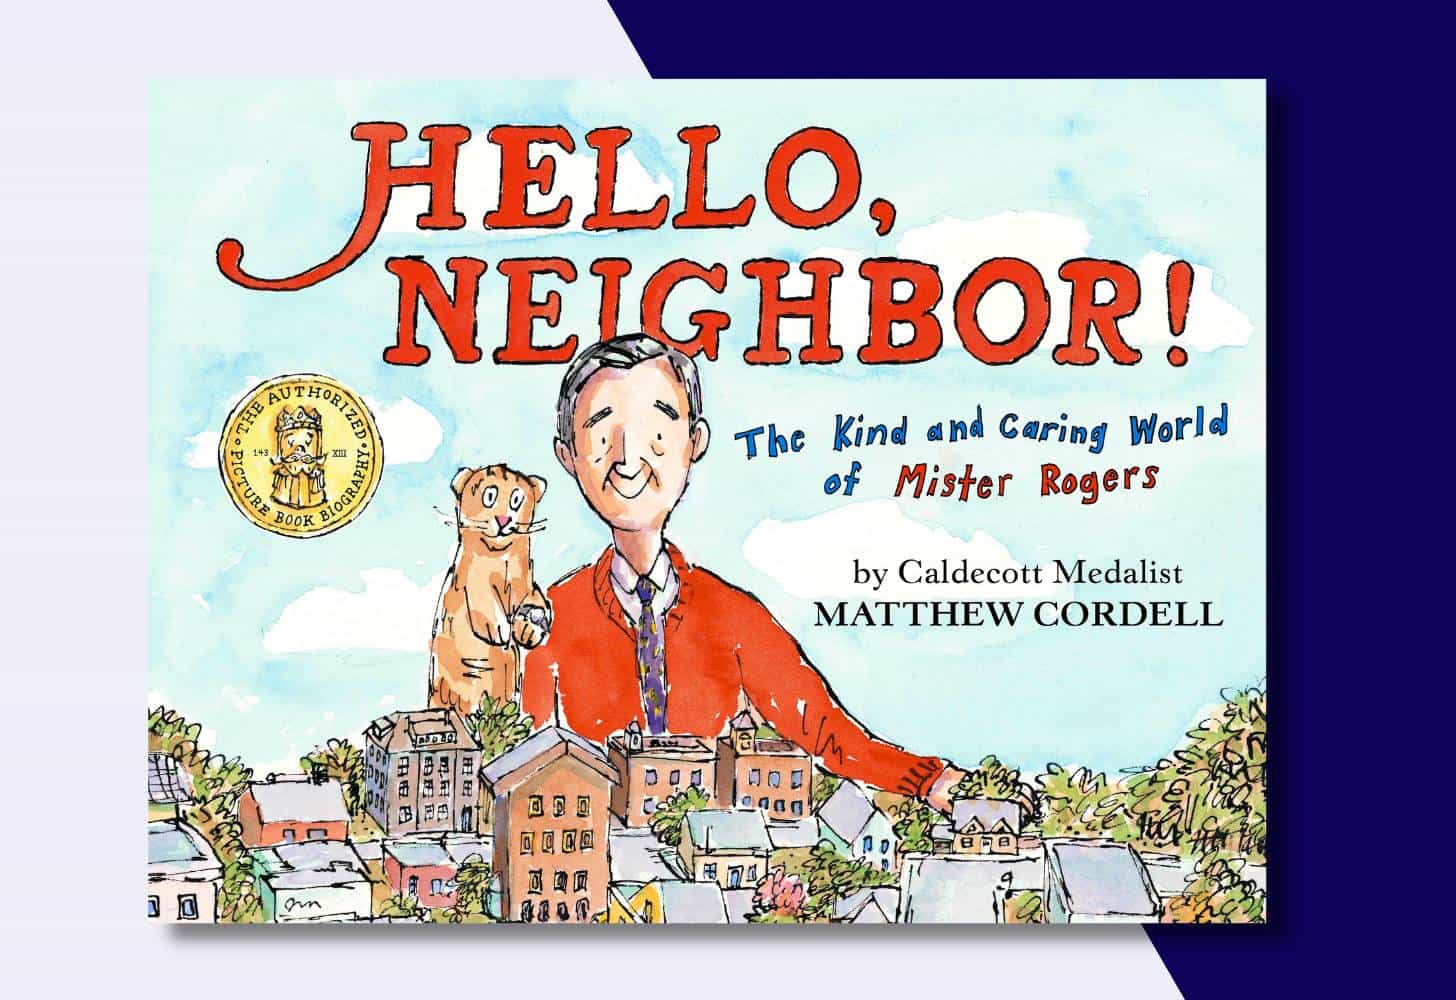 “Hello, Neighbor!” written and illustrated by Matthew Cordell